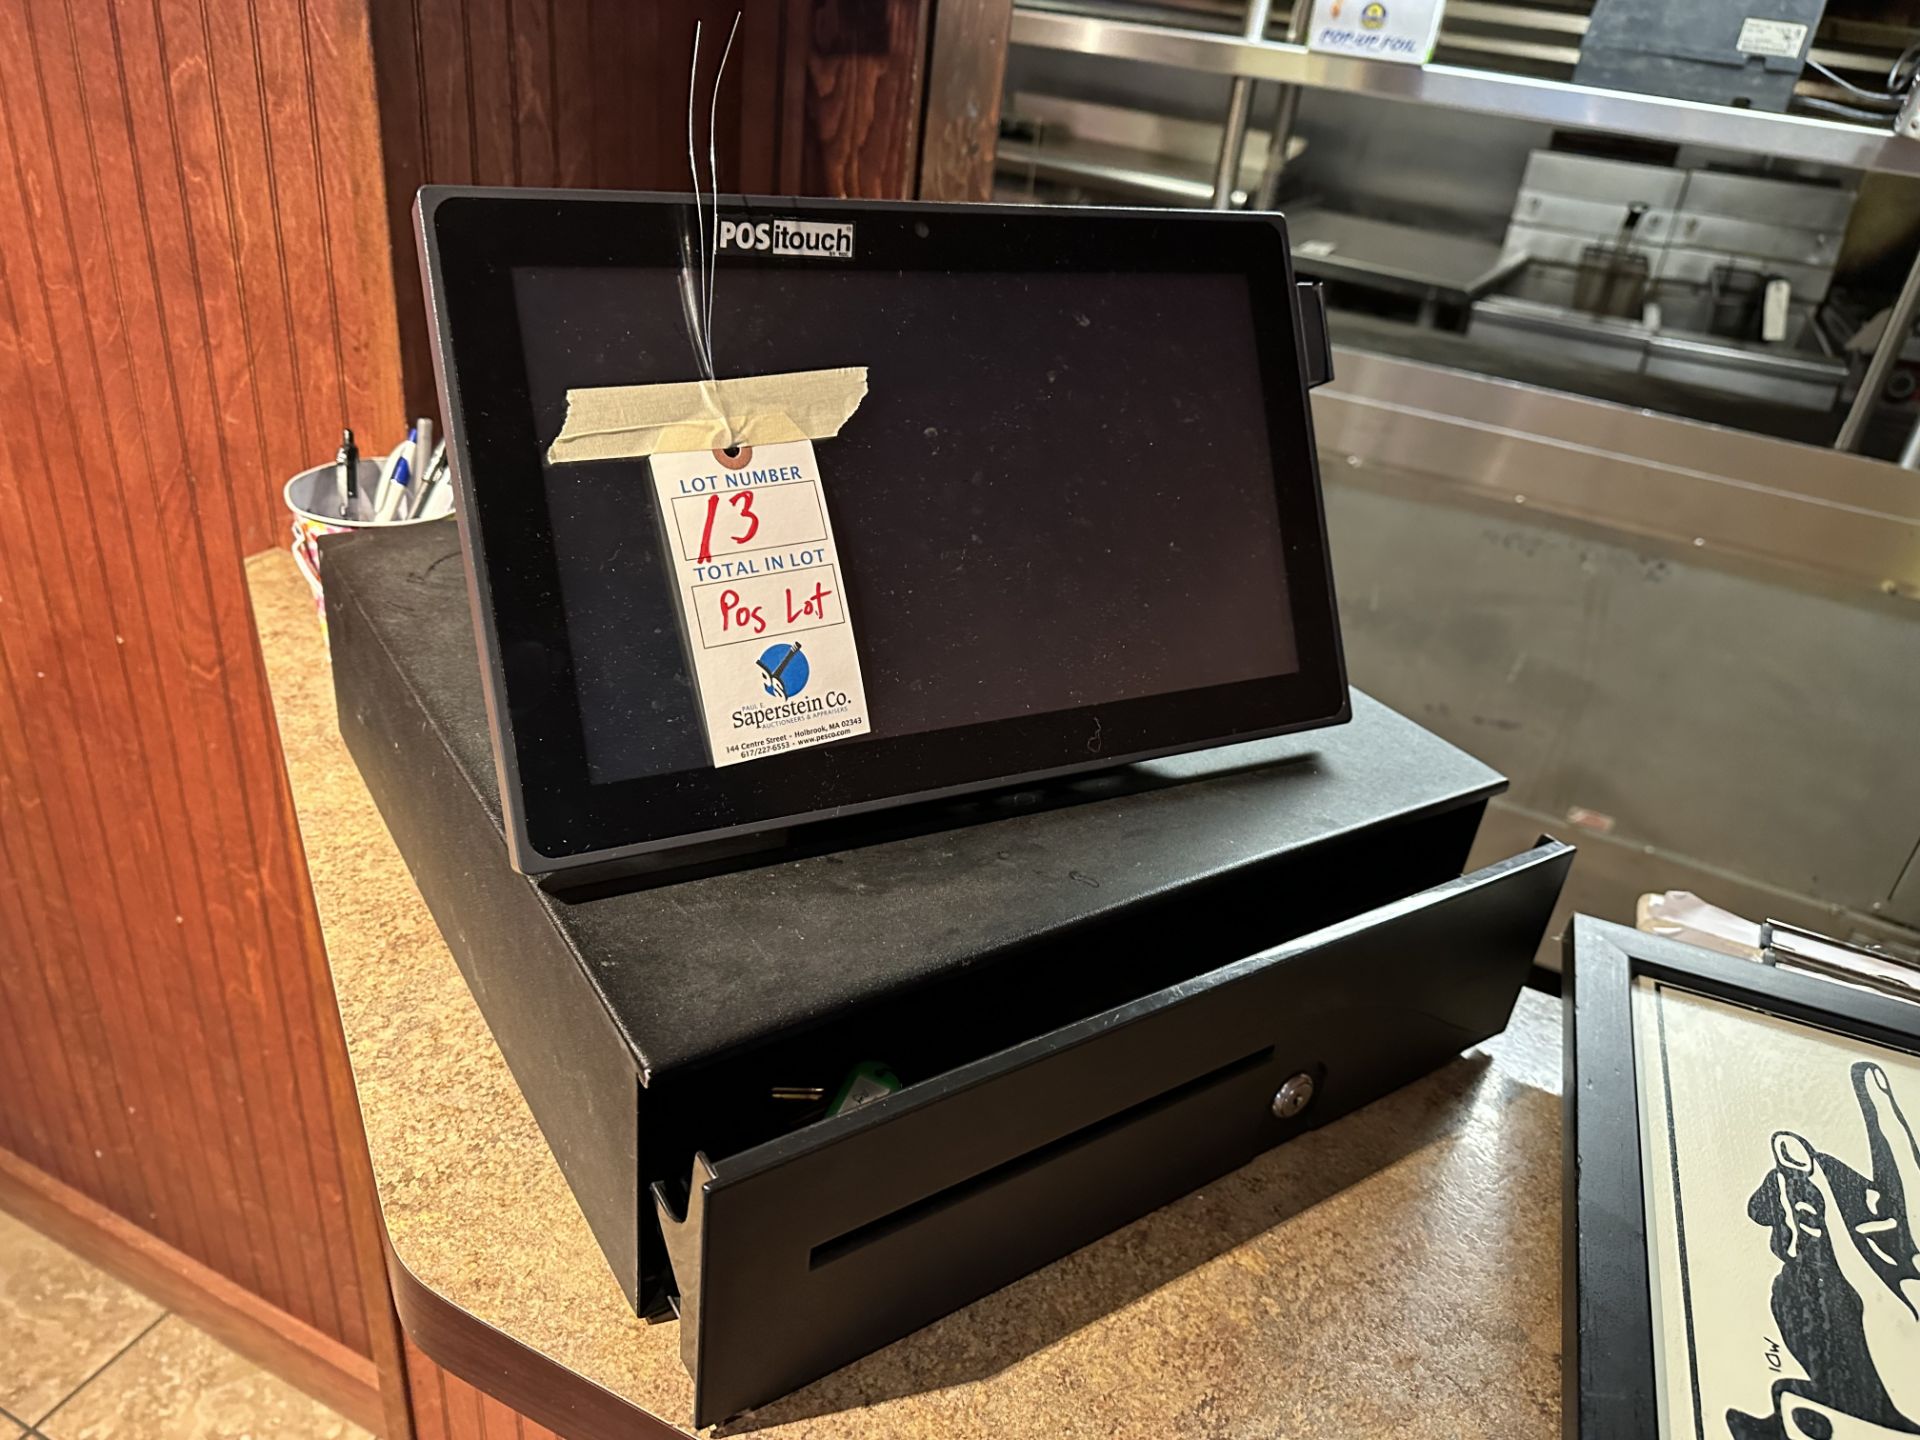 POS Touch POS System w/(2) Touch Screens, (2) Cash Drawers, (3) Printers